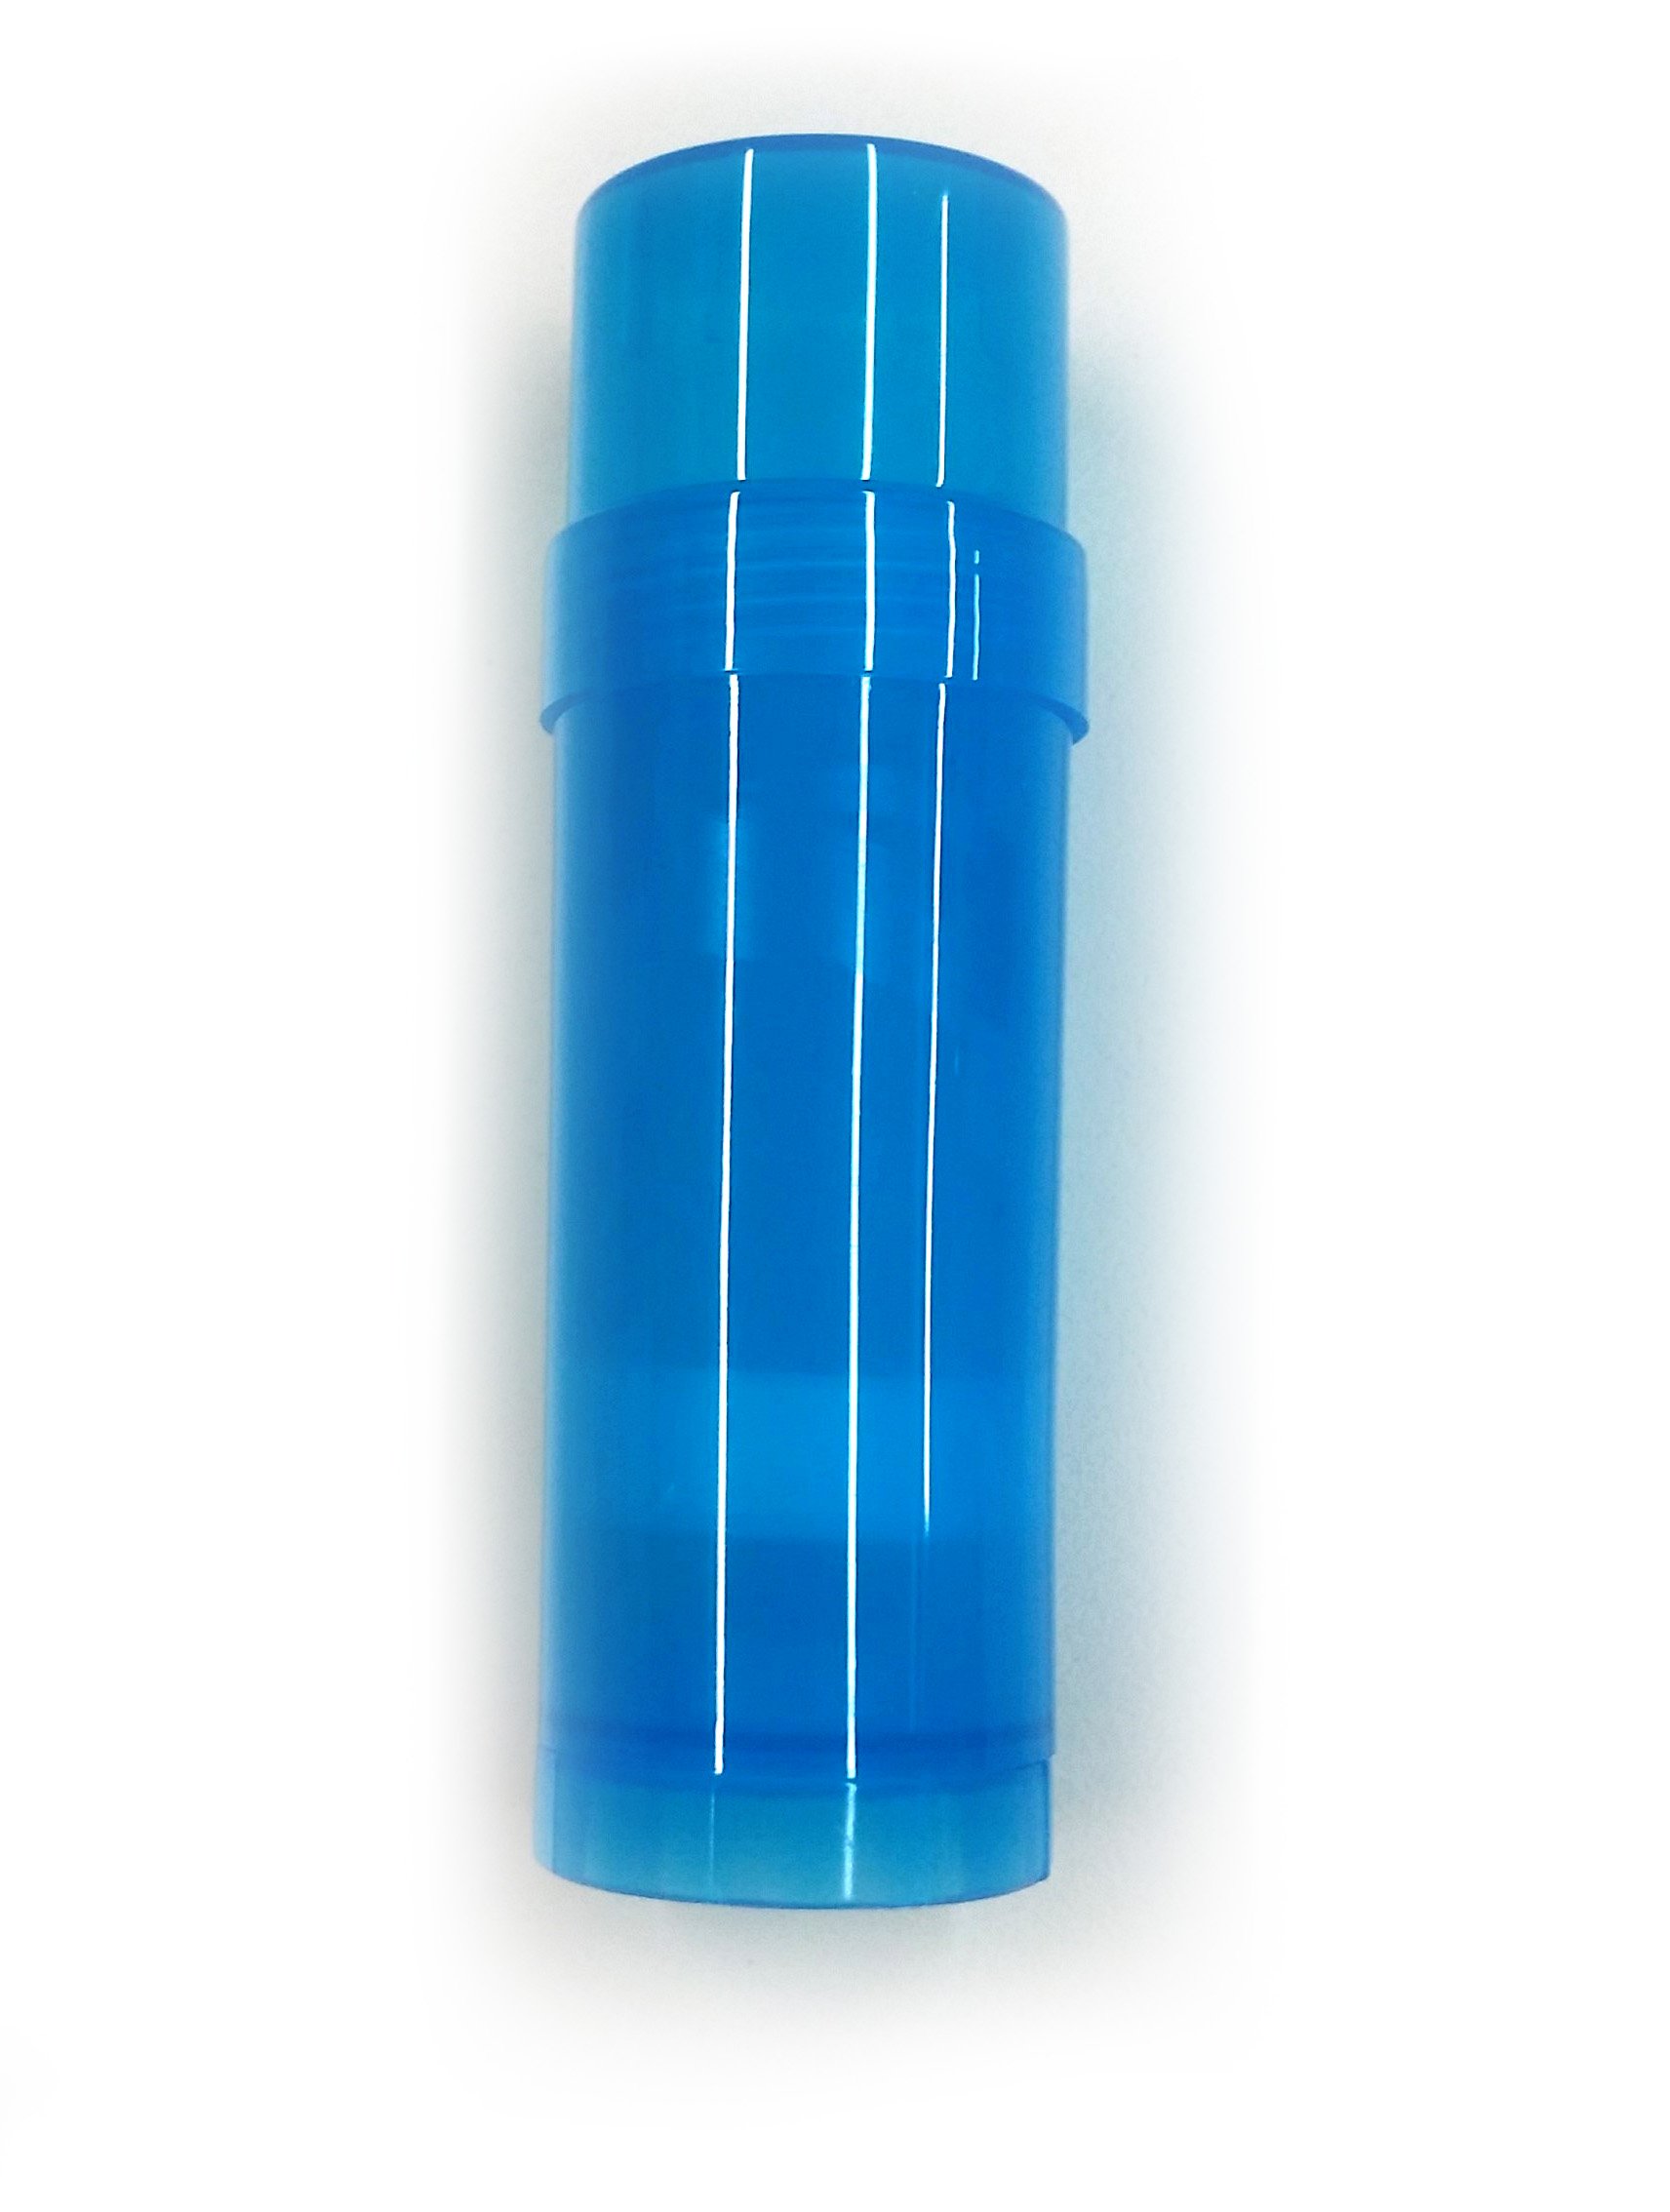 (24) Empty Clear Plastic Deodorant Containers - 2.2 Oz Cylinders (Blue)